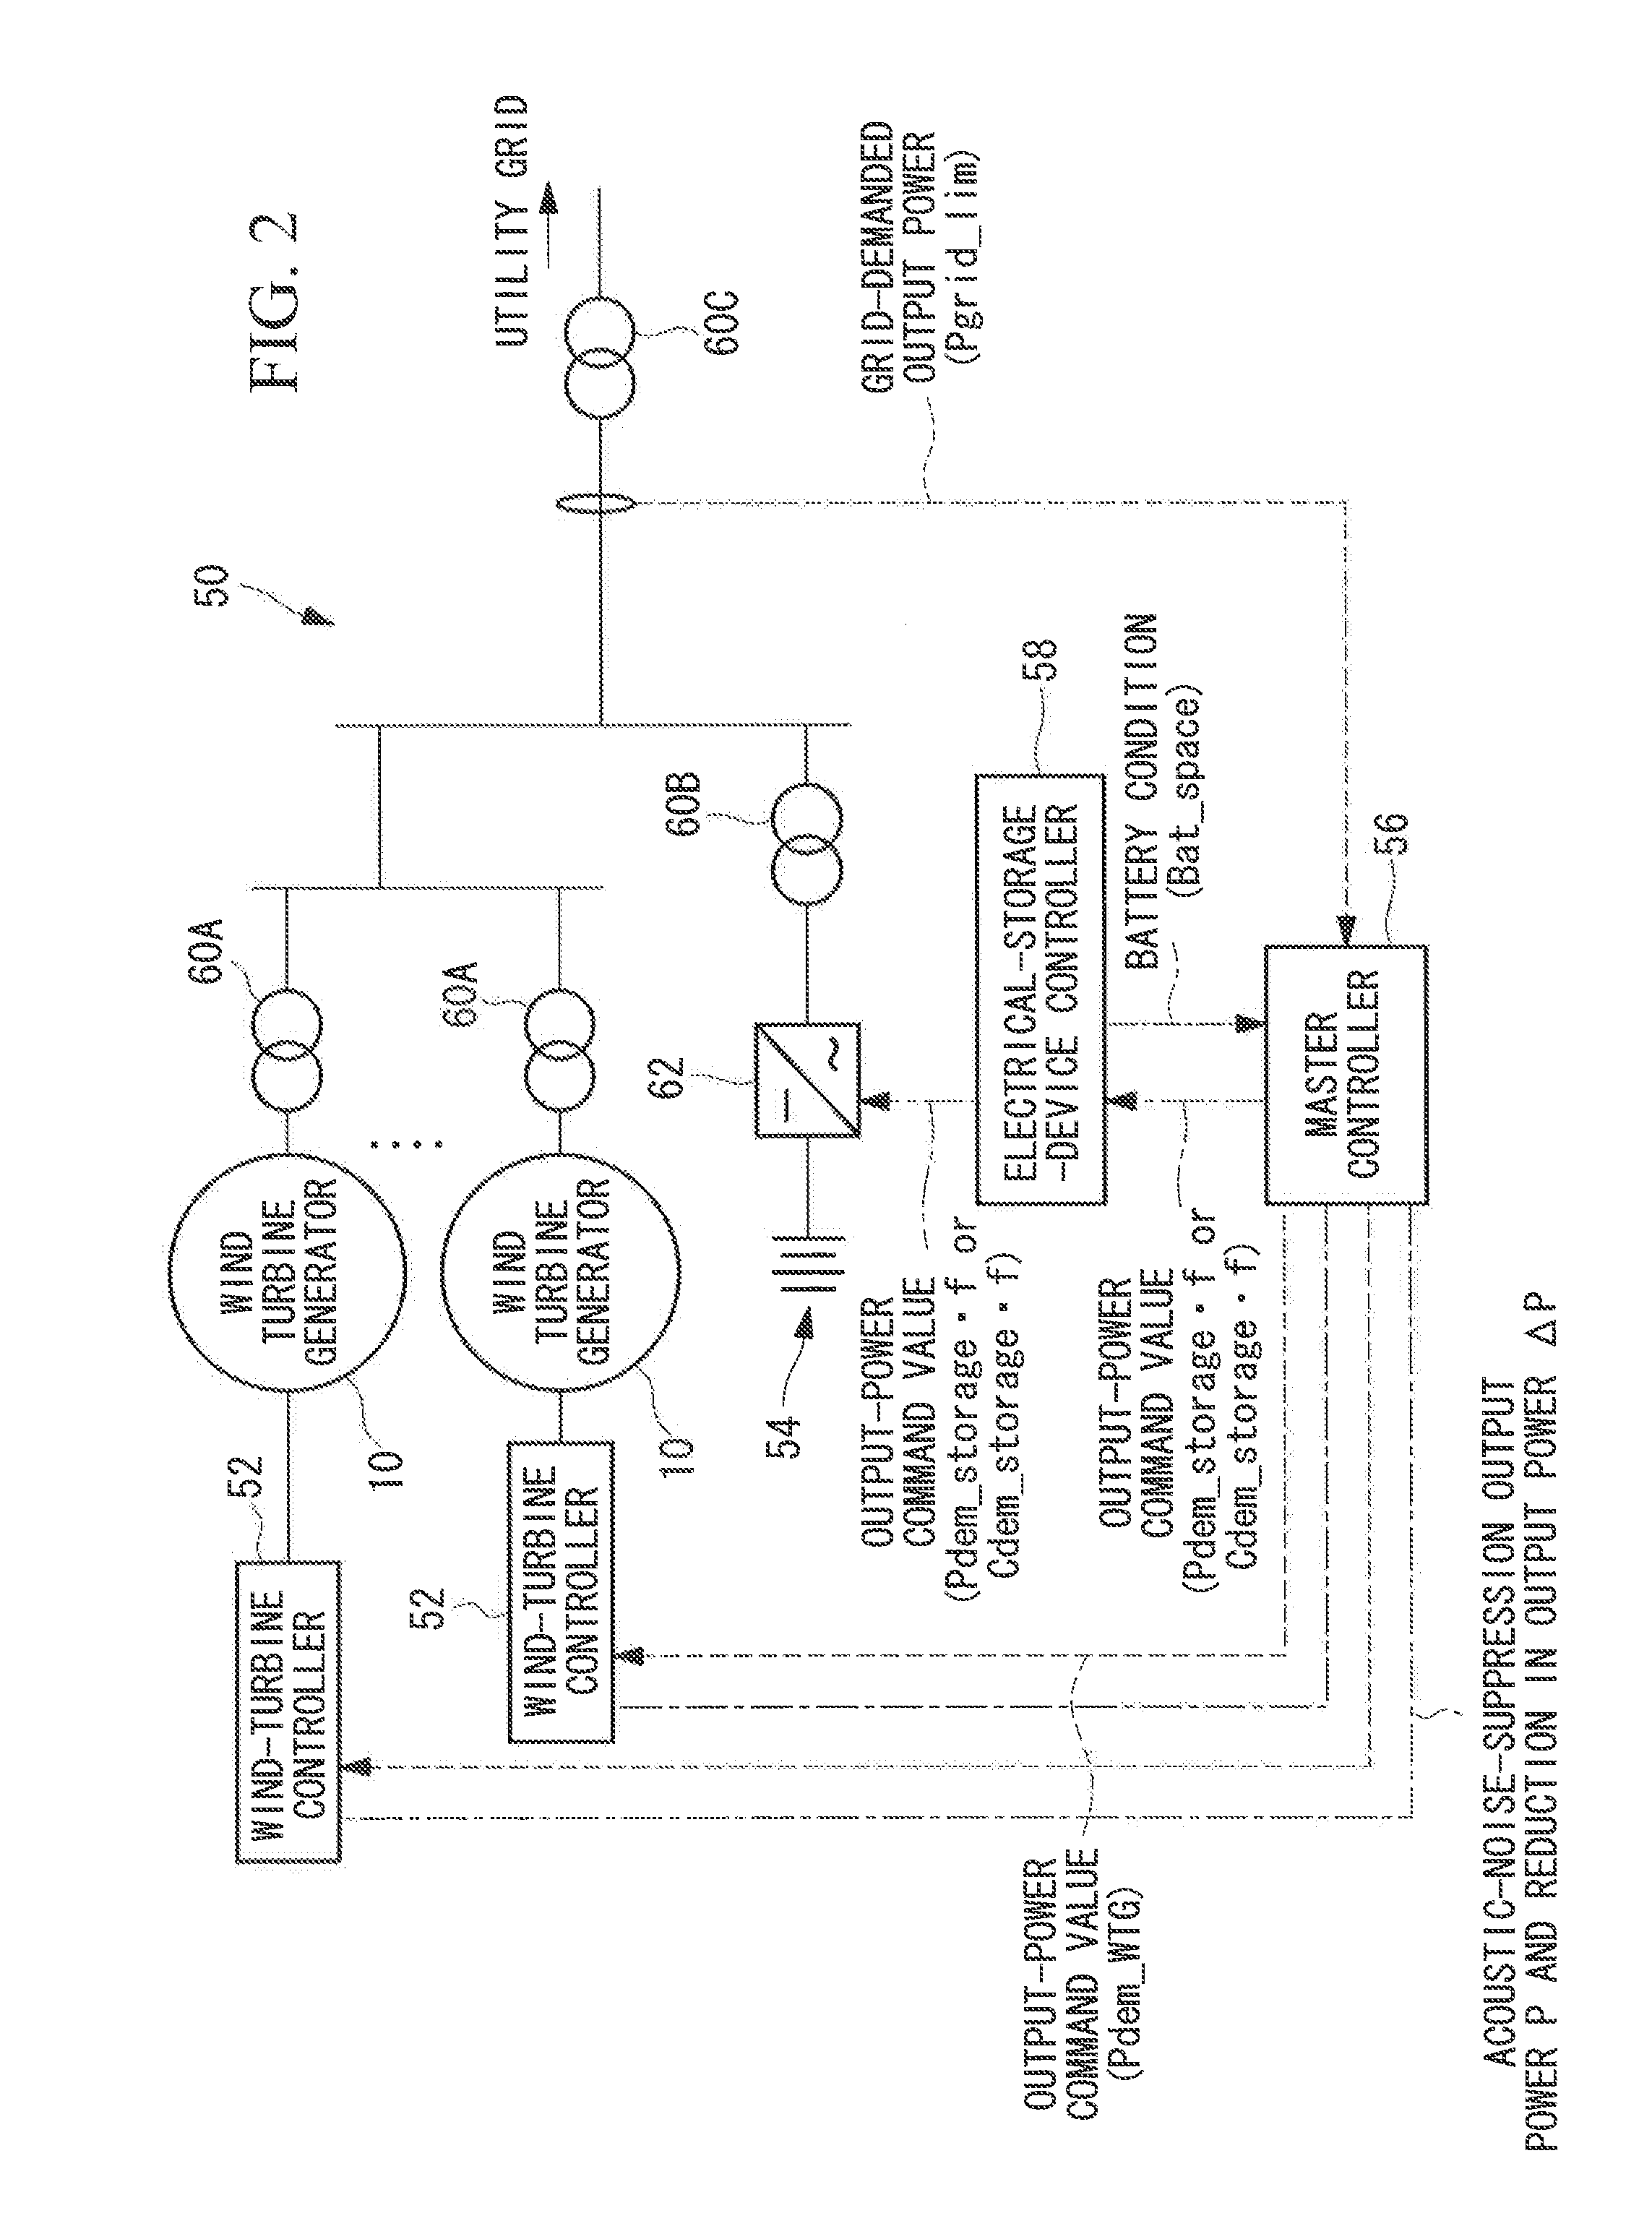 Wind power plant and wind-power-plant control method